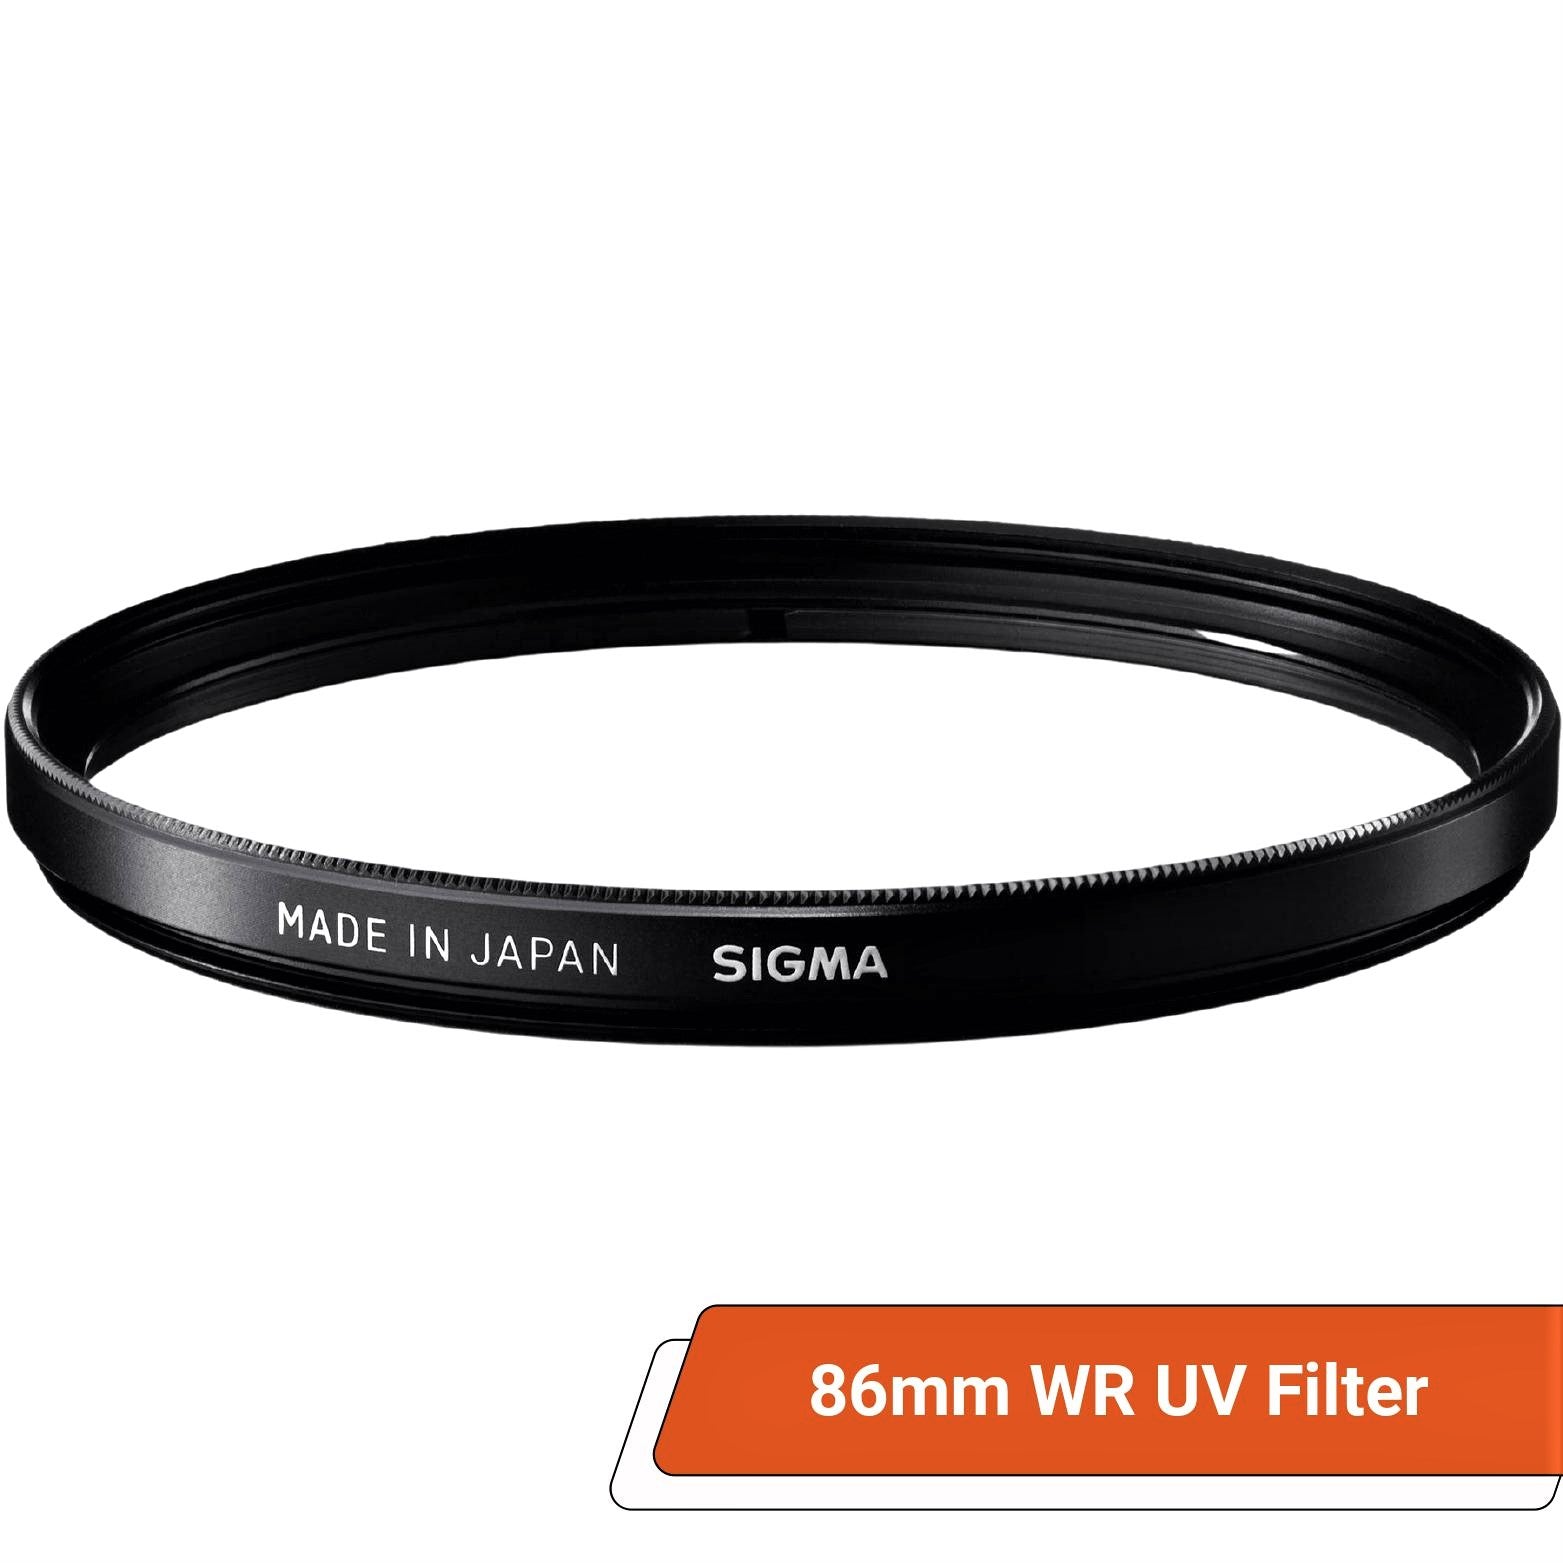 Sigma 86mm WR (Water Repellent) UV Filter